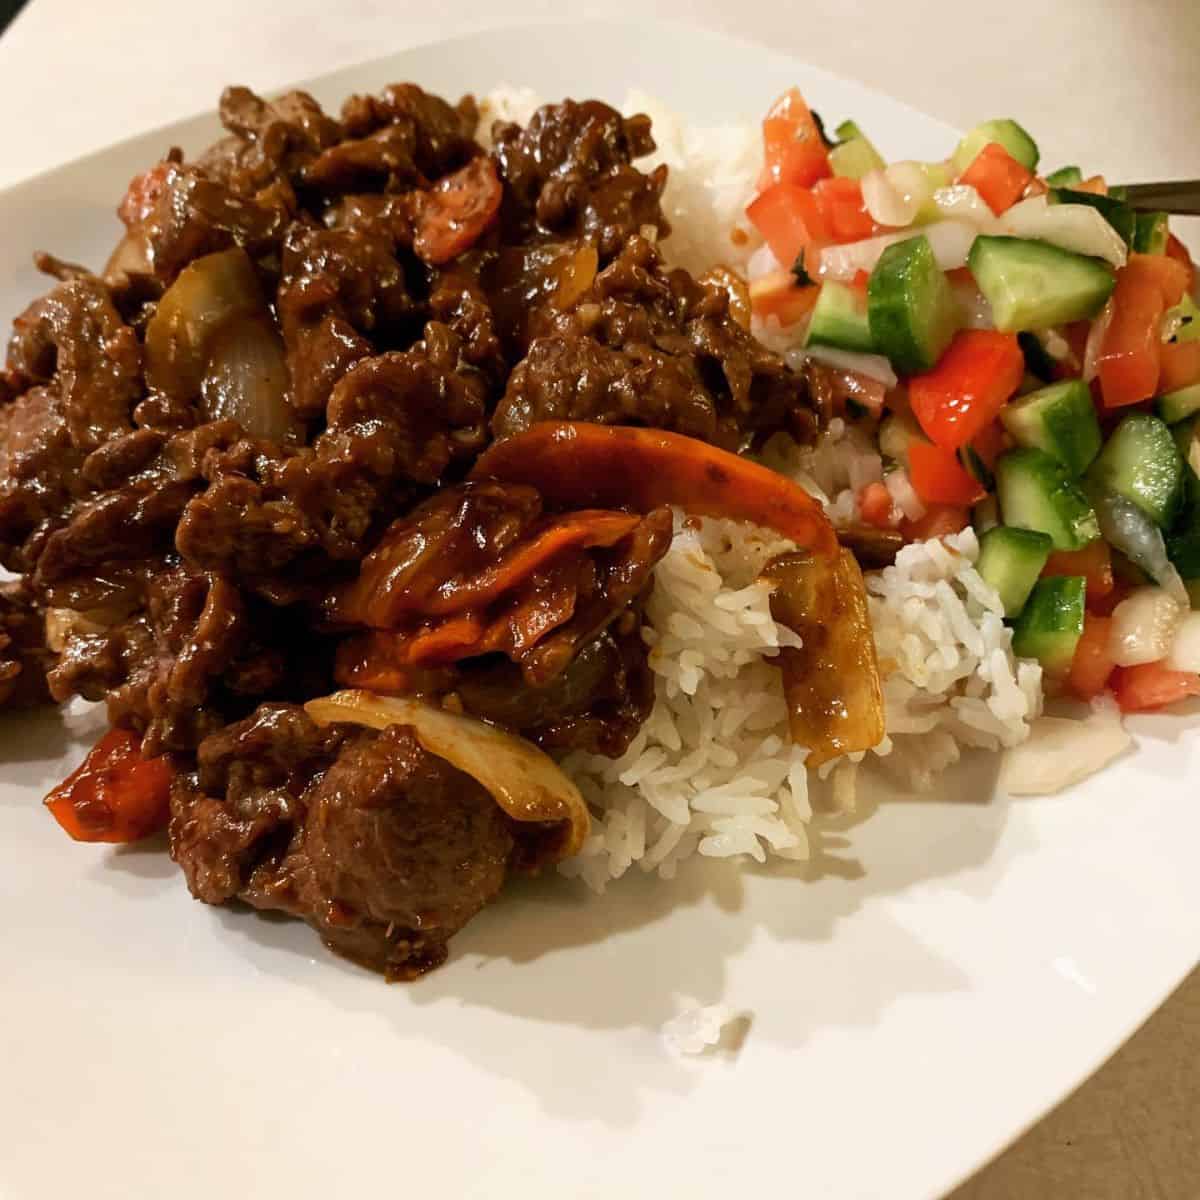 Meaty dish with white rice and a vegetable salad